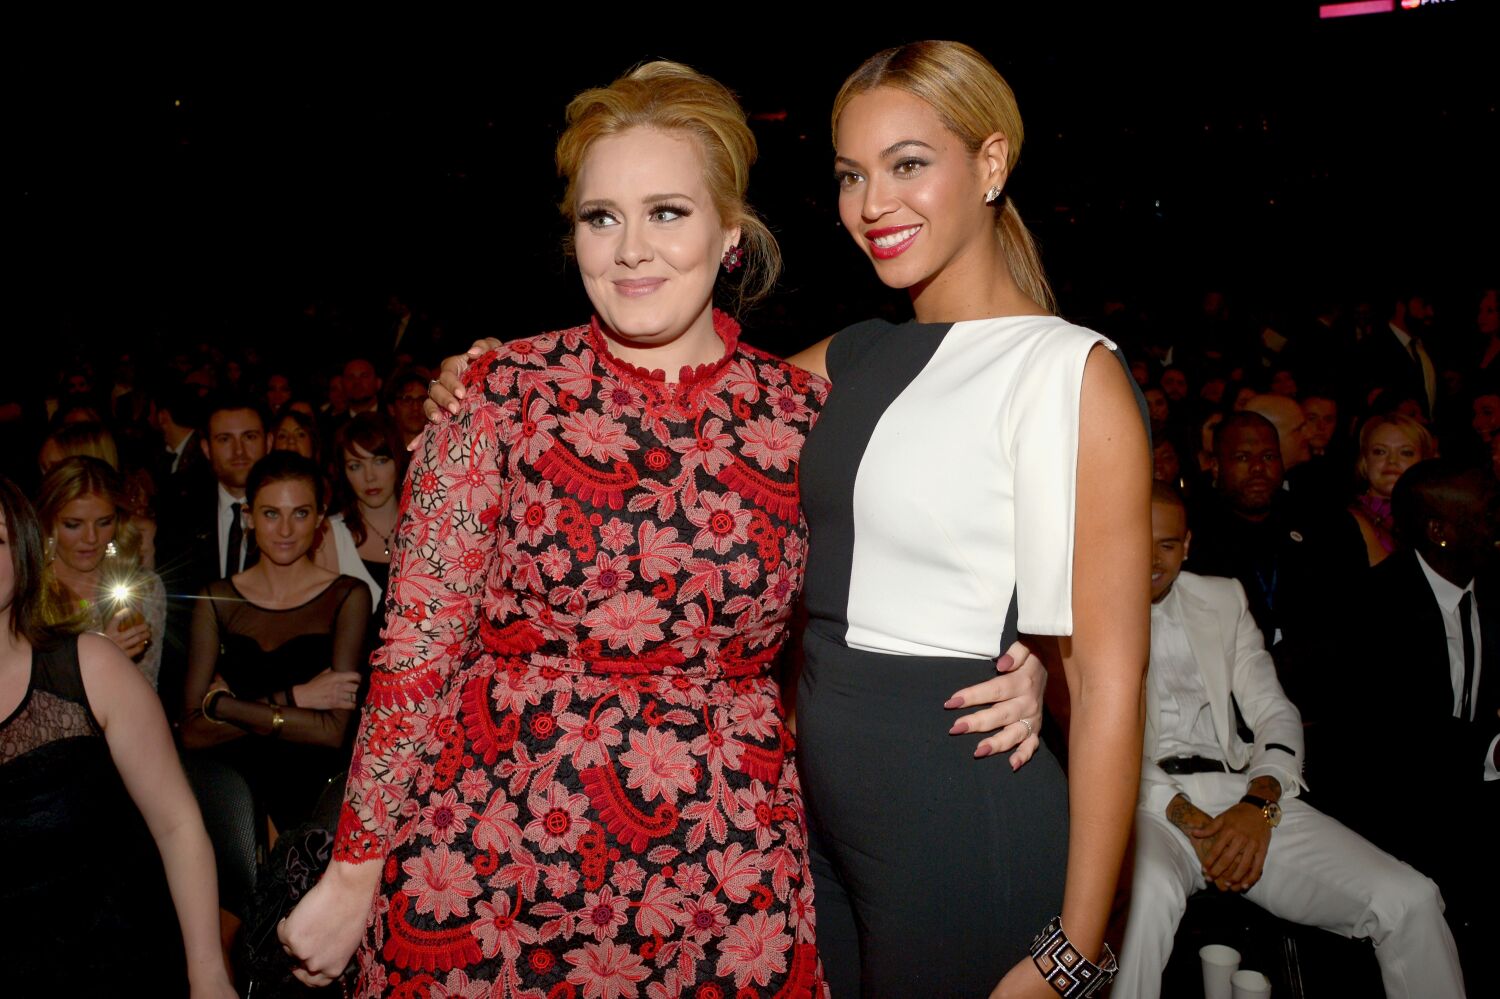 Beyoncé and Adele have a long history of ups and downs together at the Grammy Awards